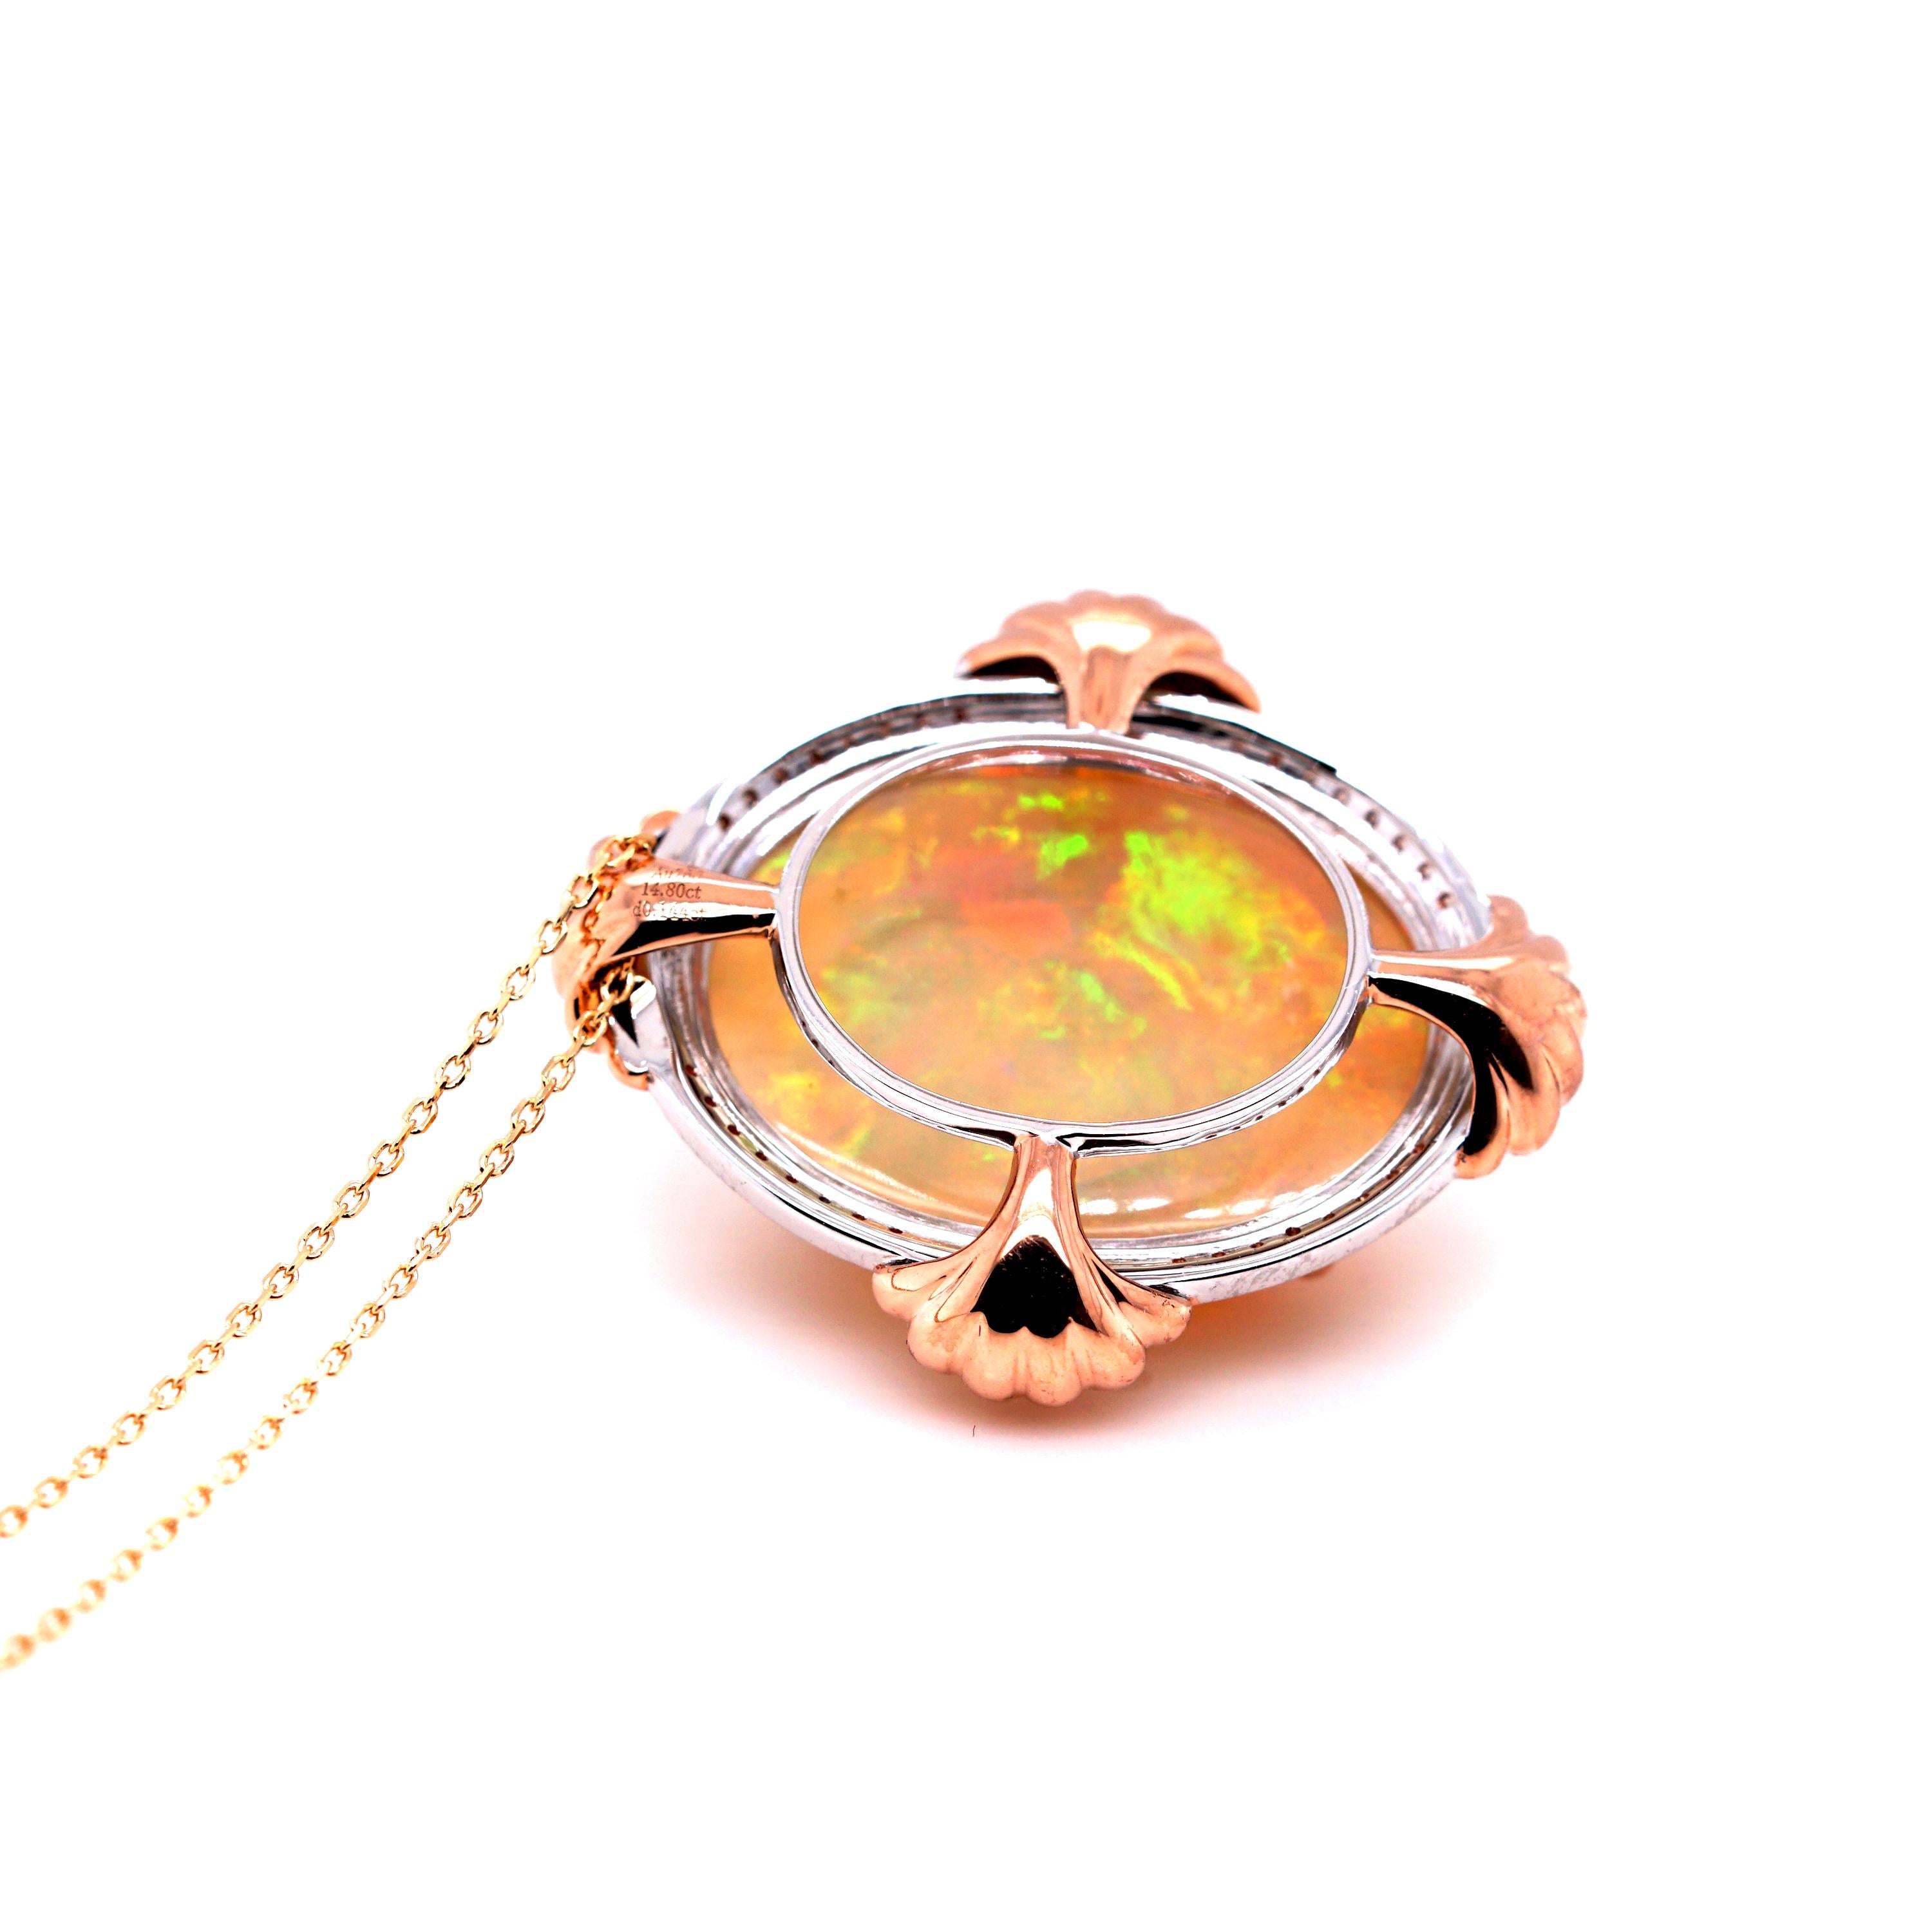 Description:
An 18ct white gold original design by Fei Liu, featuring an opulent 14.8ct opal, framed with diamonds and rose gold accents of sea shell motifs.

- Weight: 10gm
- Size (HxWxD): 30 x 25 x 13mm
- Chain length: 16 inches + 2-inch